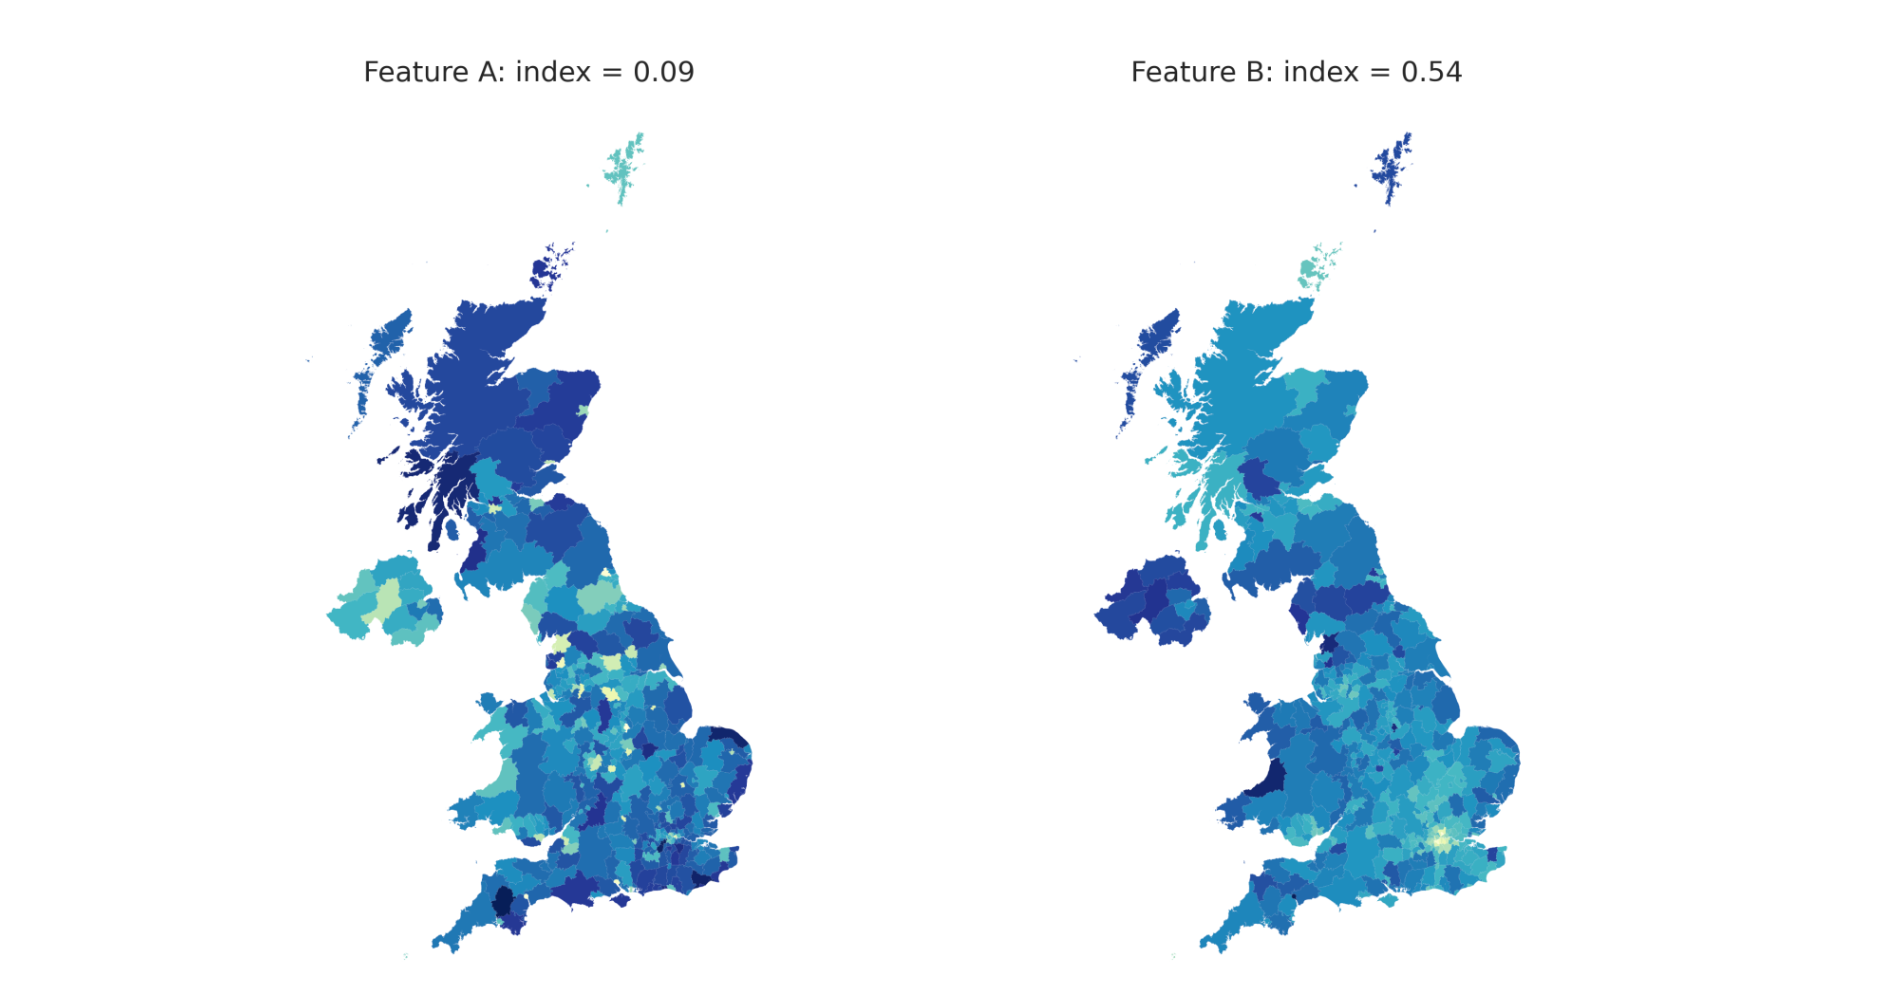 Moran Index on two features across UK